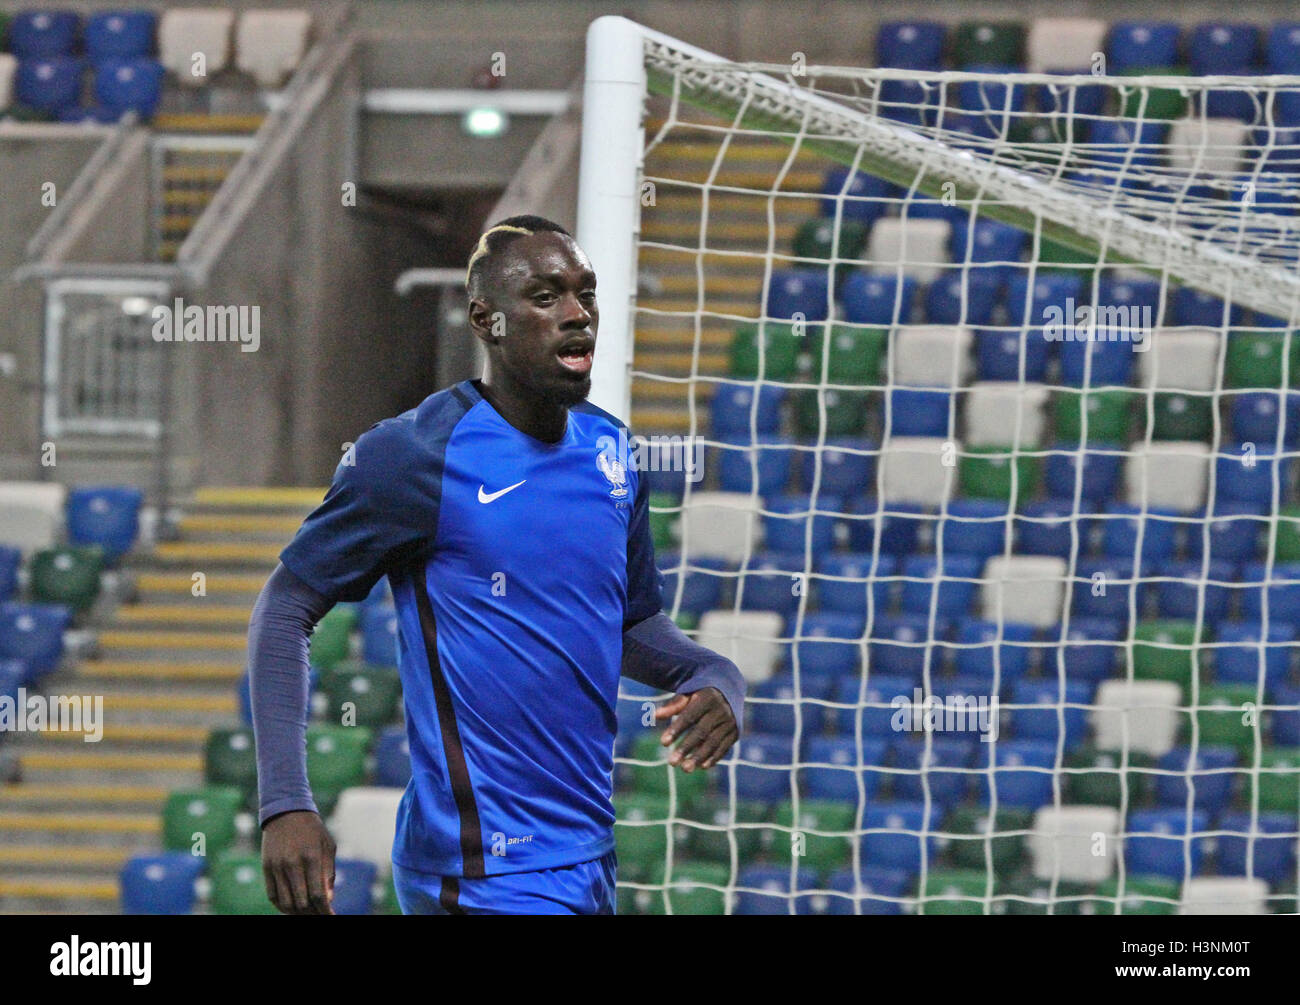 National Football Stadium at Windsor Park, Belfast, Northern Ireland. 11 Oct 2016.France's Jean-Kevin Augustin after his second goal put his side 2-0 ahead. David Hunter/Alamy Live News. Stock Photo